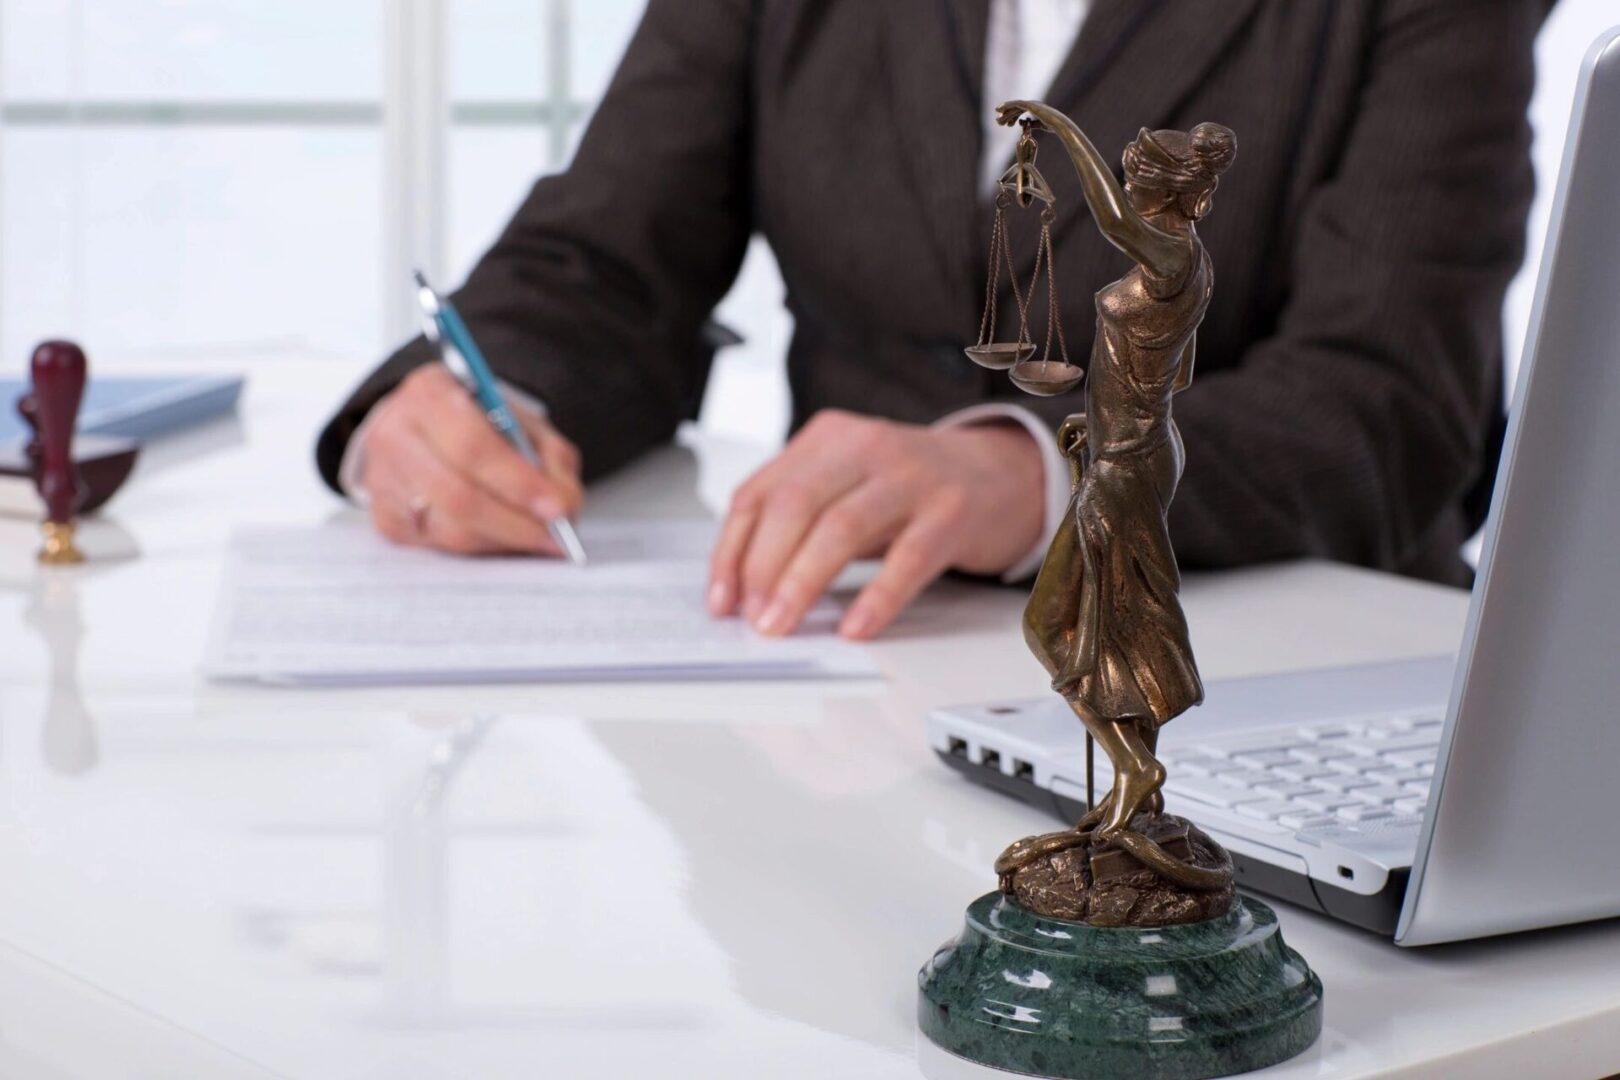 A person sitting at a desk with papers and a statue of justice.